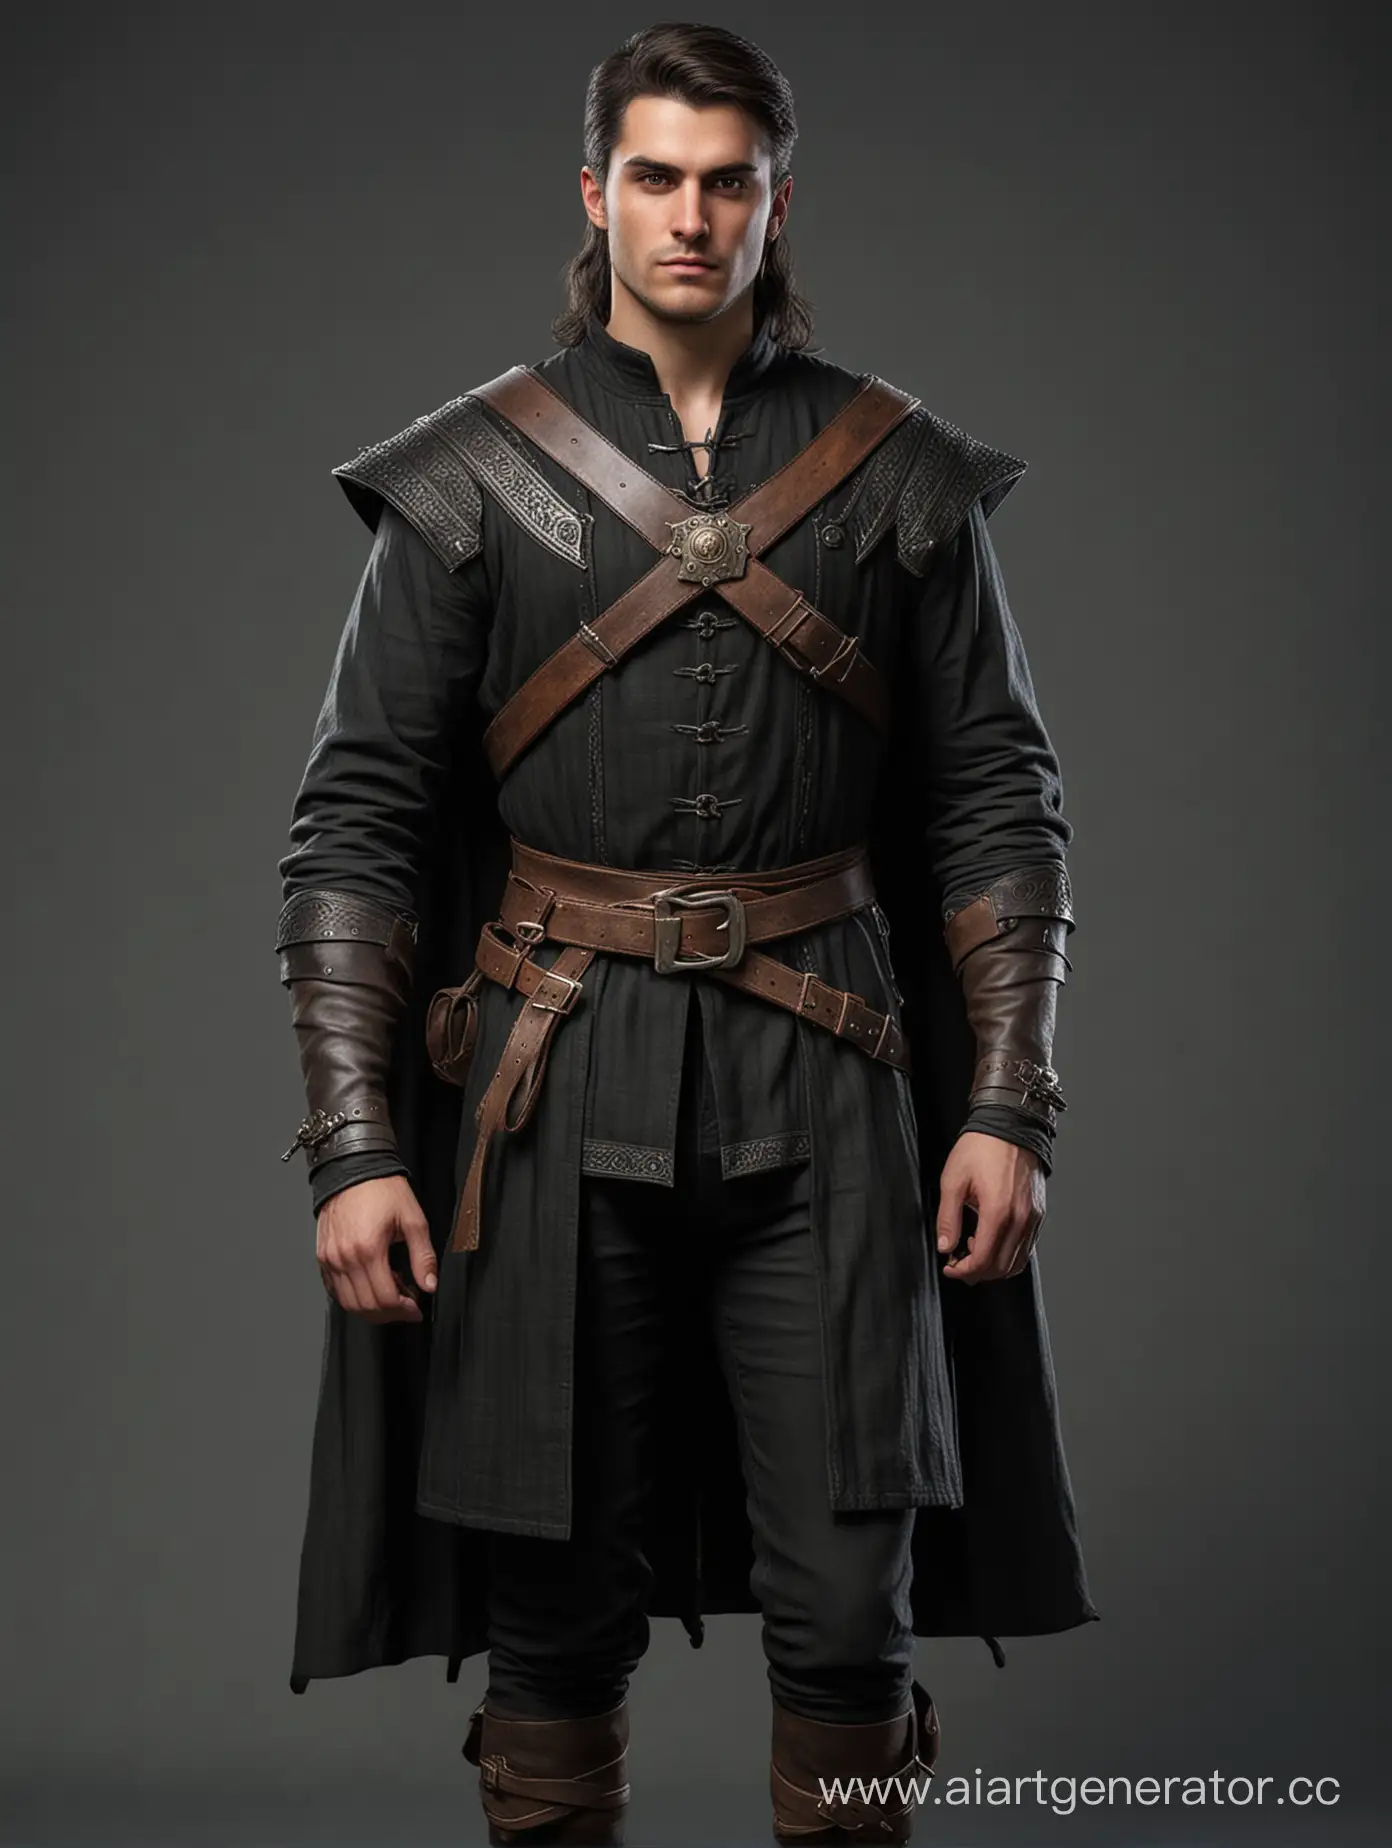 Generate a person, a man in the 14th century, 24 years old, the Middle Ages, realistic, full-length, with a chaperon on his head, dressed in a brigantine and black clothes, in the style of images from the Witcher universe